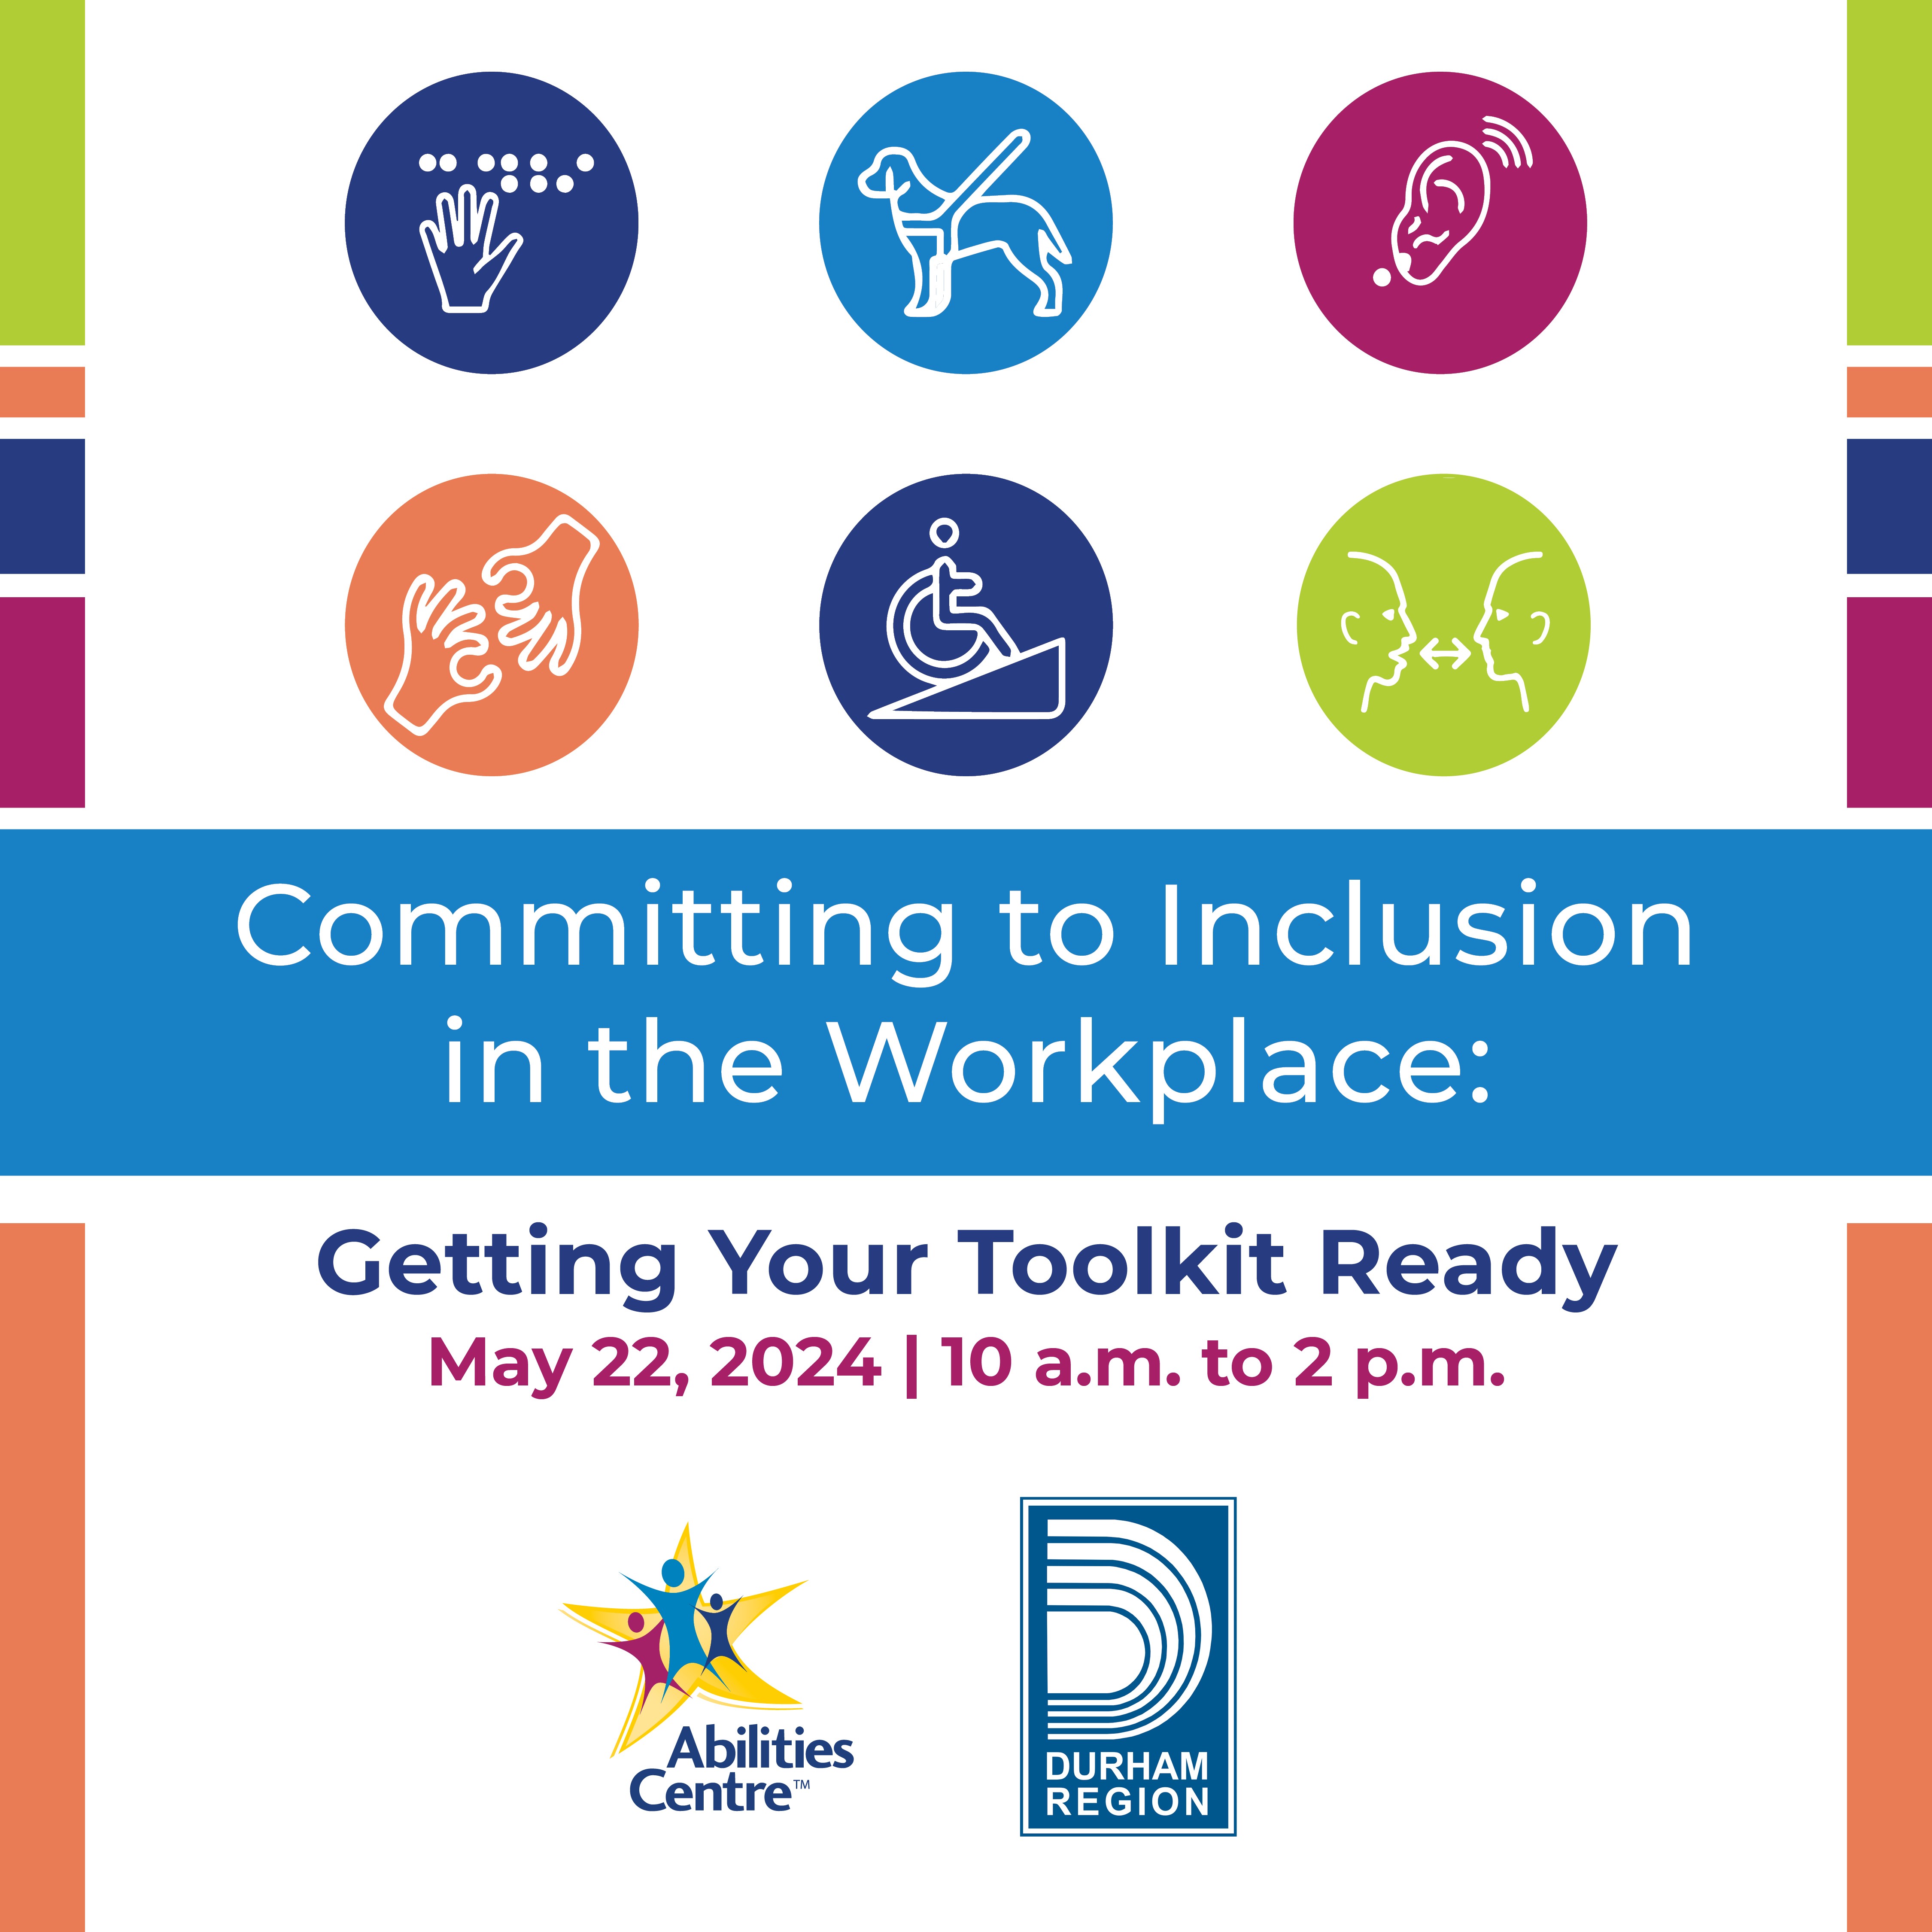 Committing to Inclusion